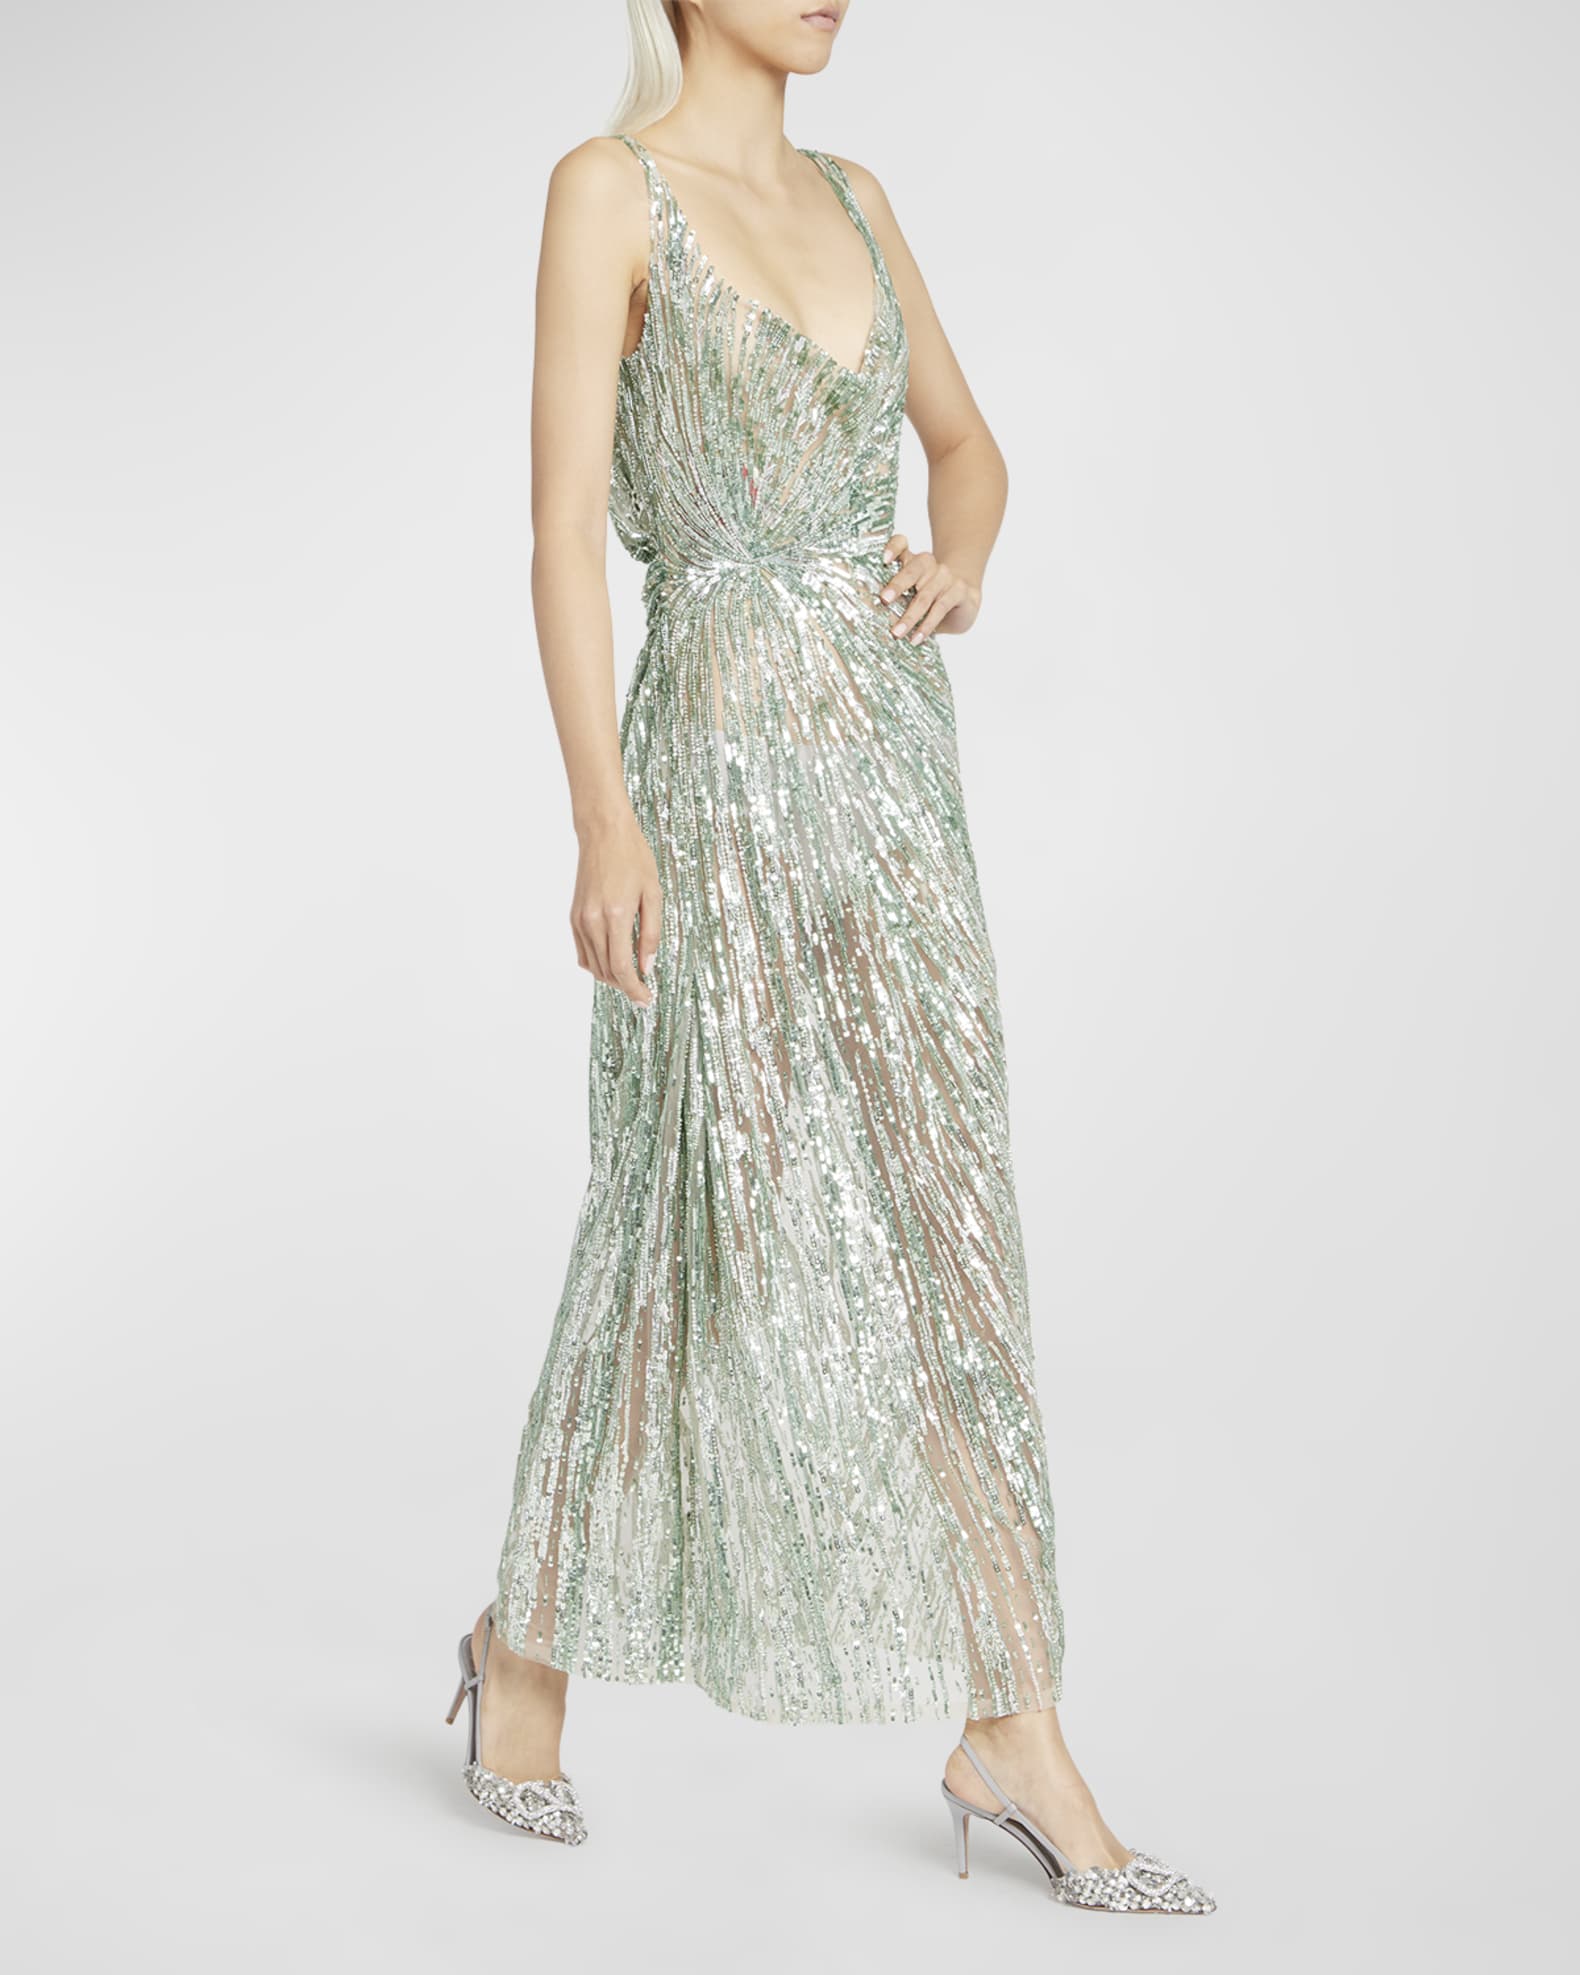 Valentino Gathered Evening Gown with Sequin Embellishment | Neiman Marcus